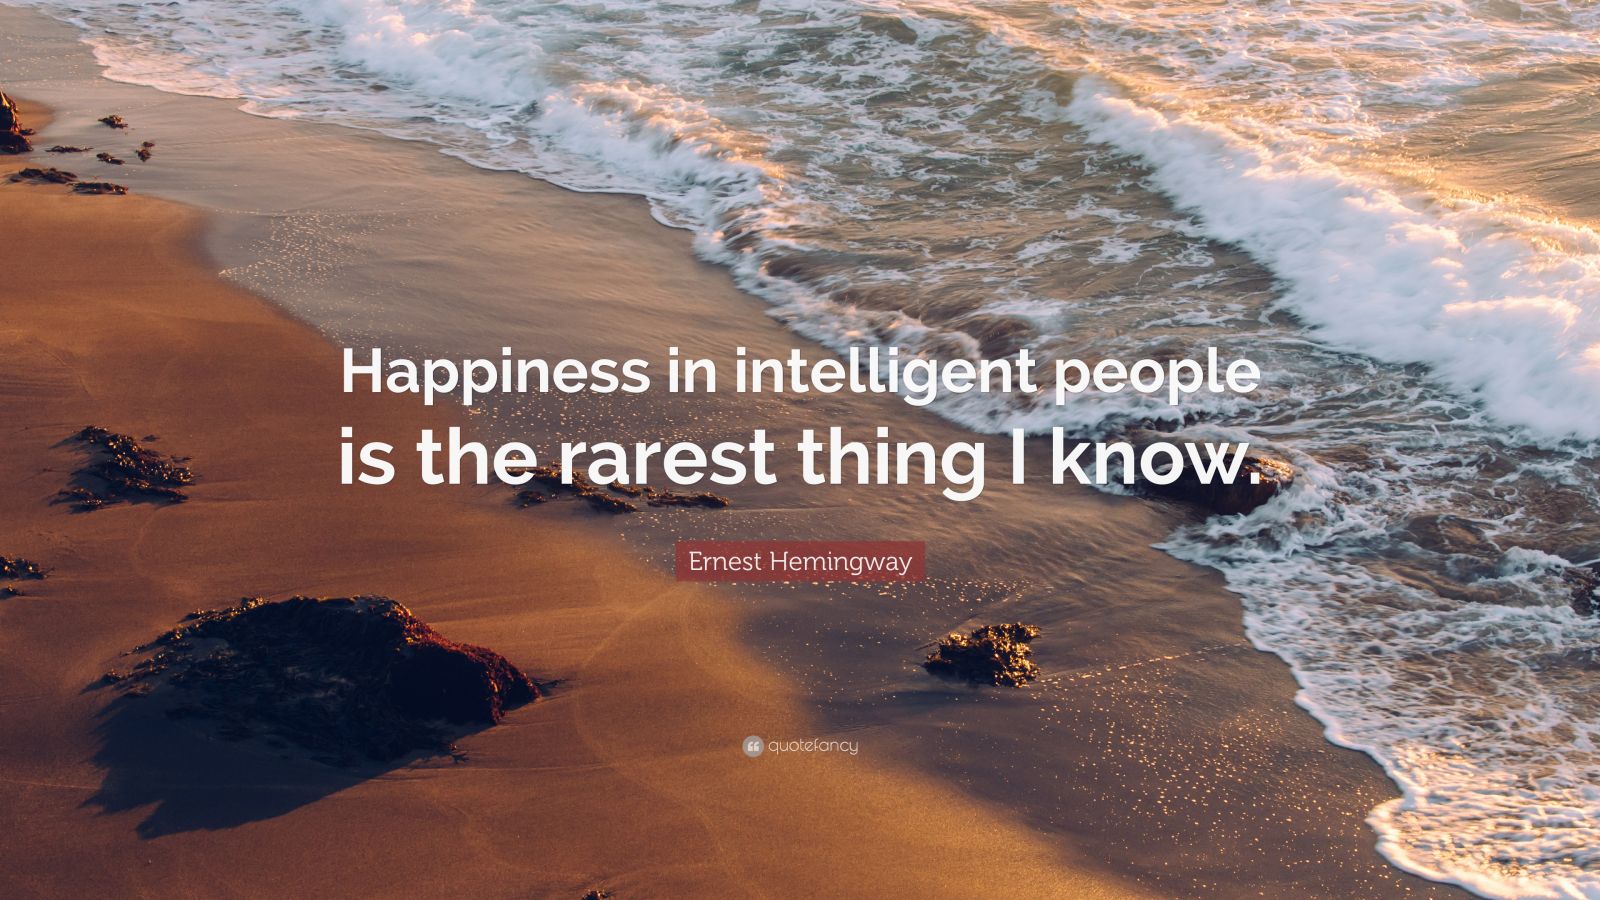 Ernest Hemingway Quote: “Happiness in intelligent people is the rarest